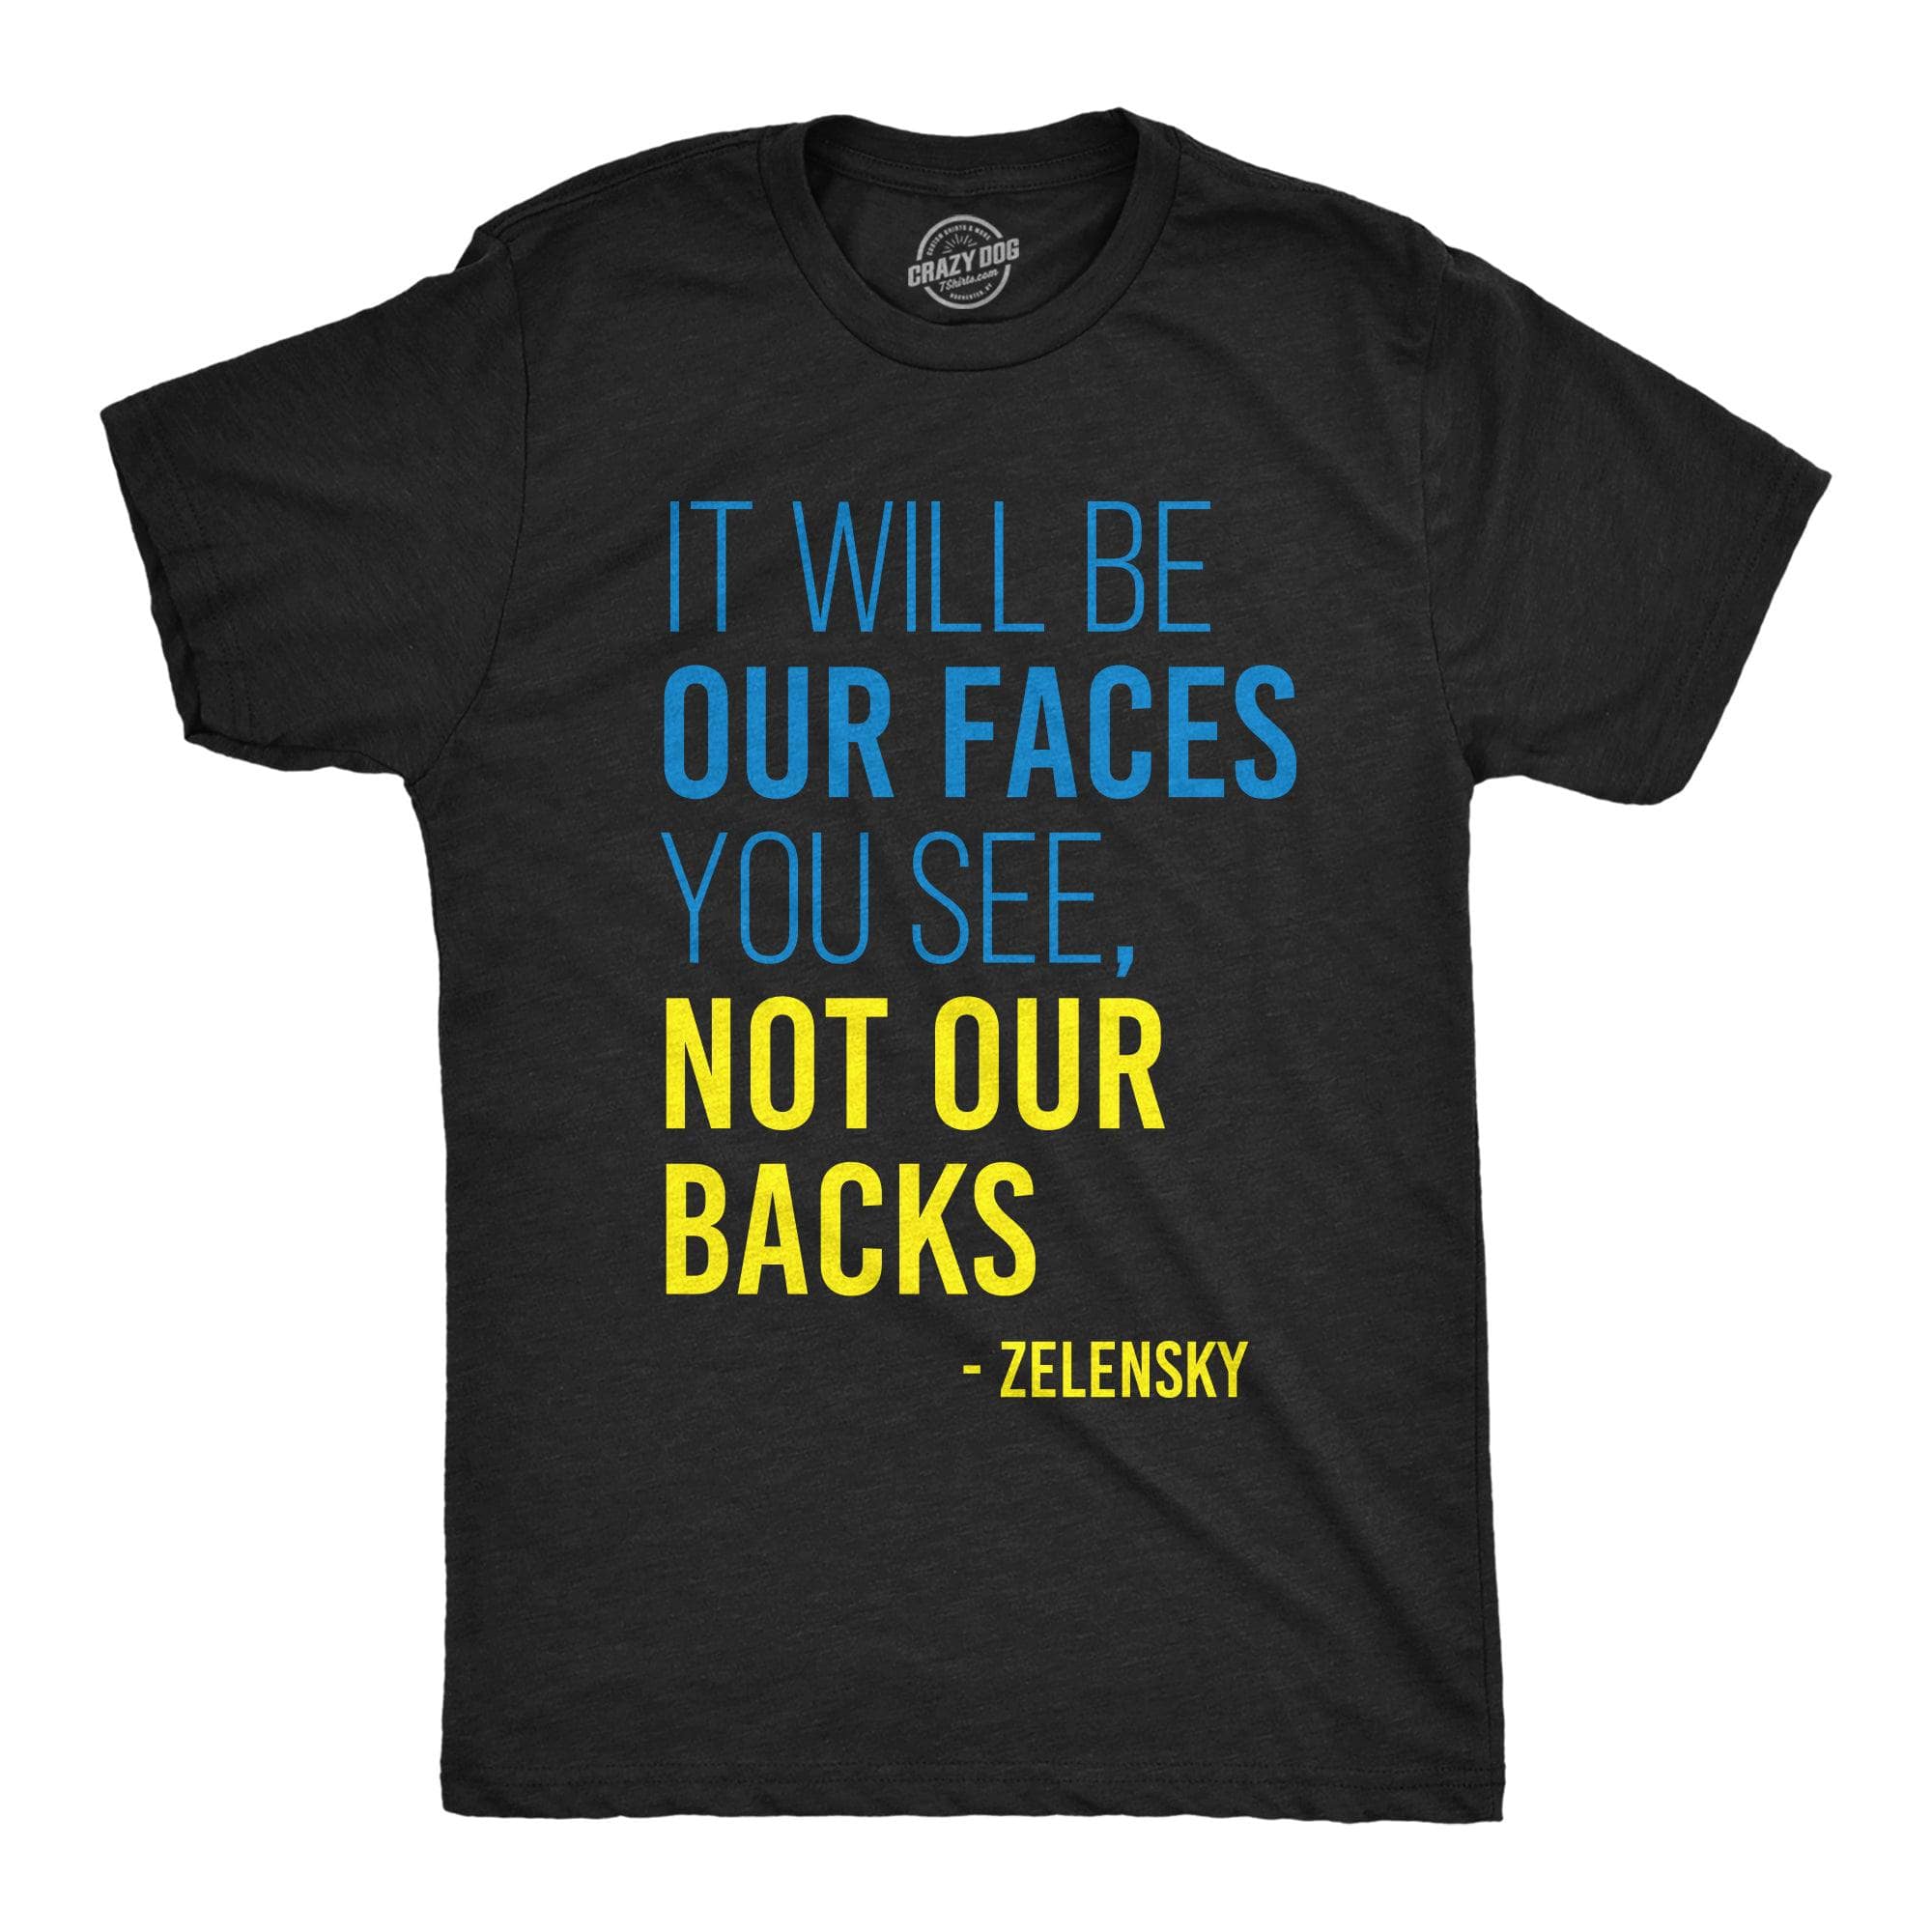 It Will Be Our Faces You See, Not Our Backs Men's Tshirt  -  Crazy Dog T-Shirts